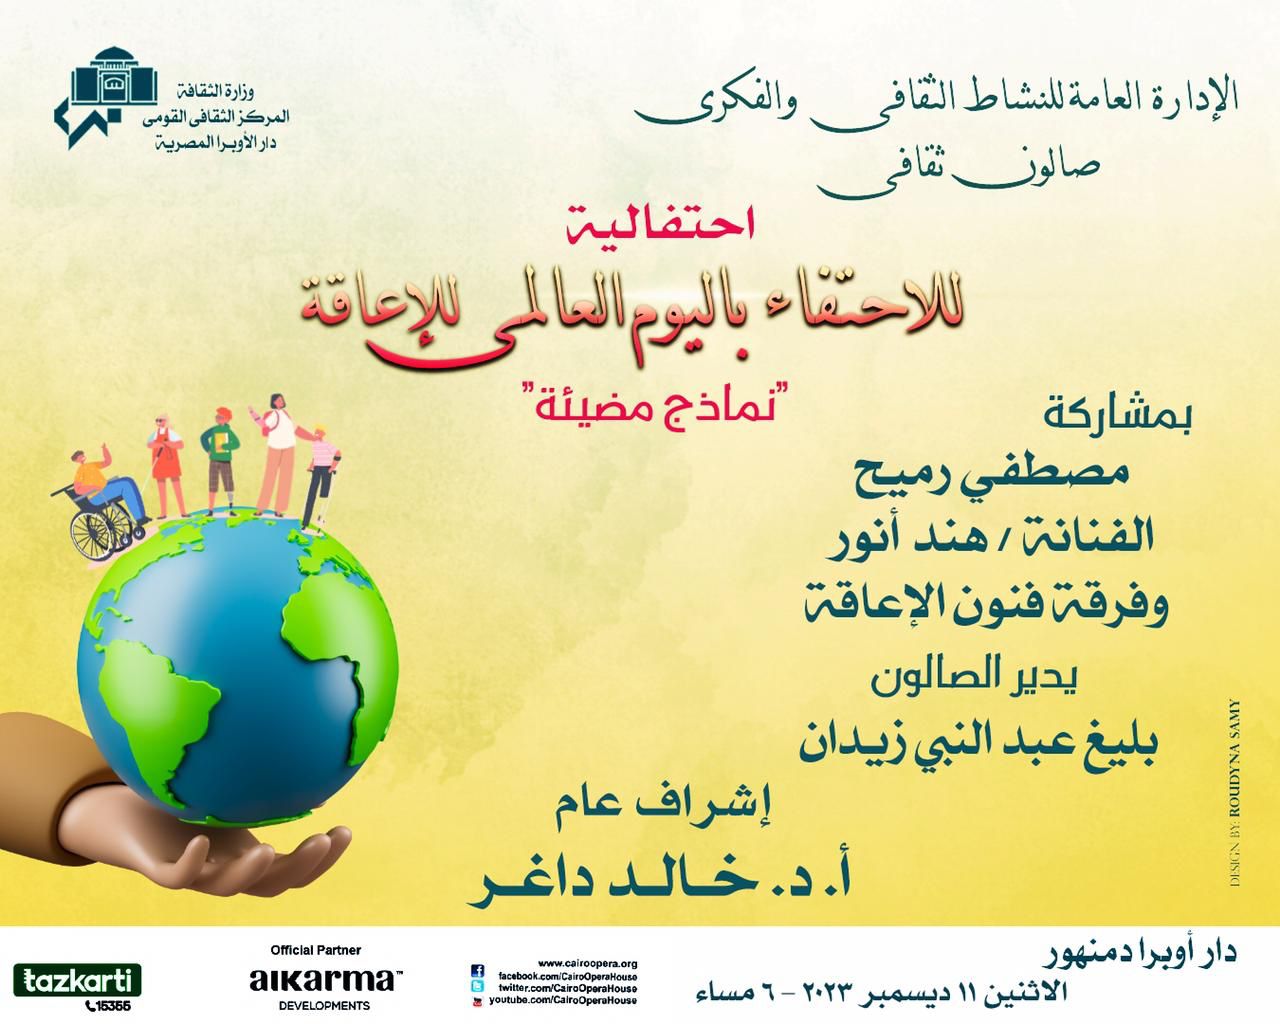 Damanhour Opera House Cultural Salon Celebrates International Day of Persons with Disabilities